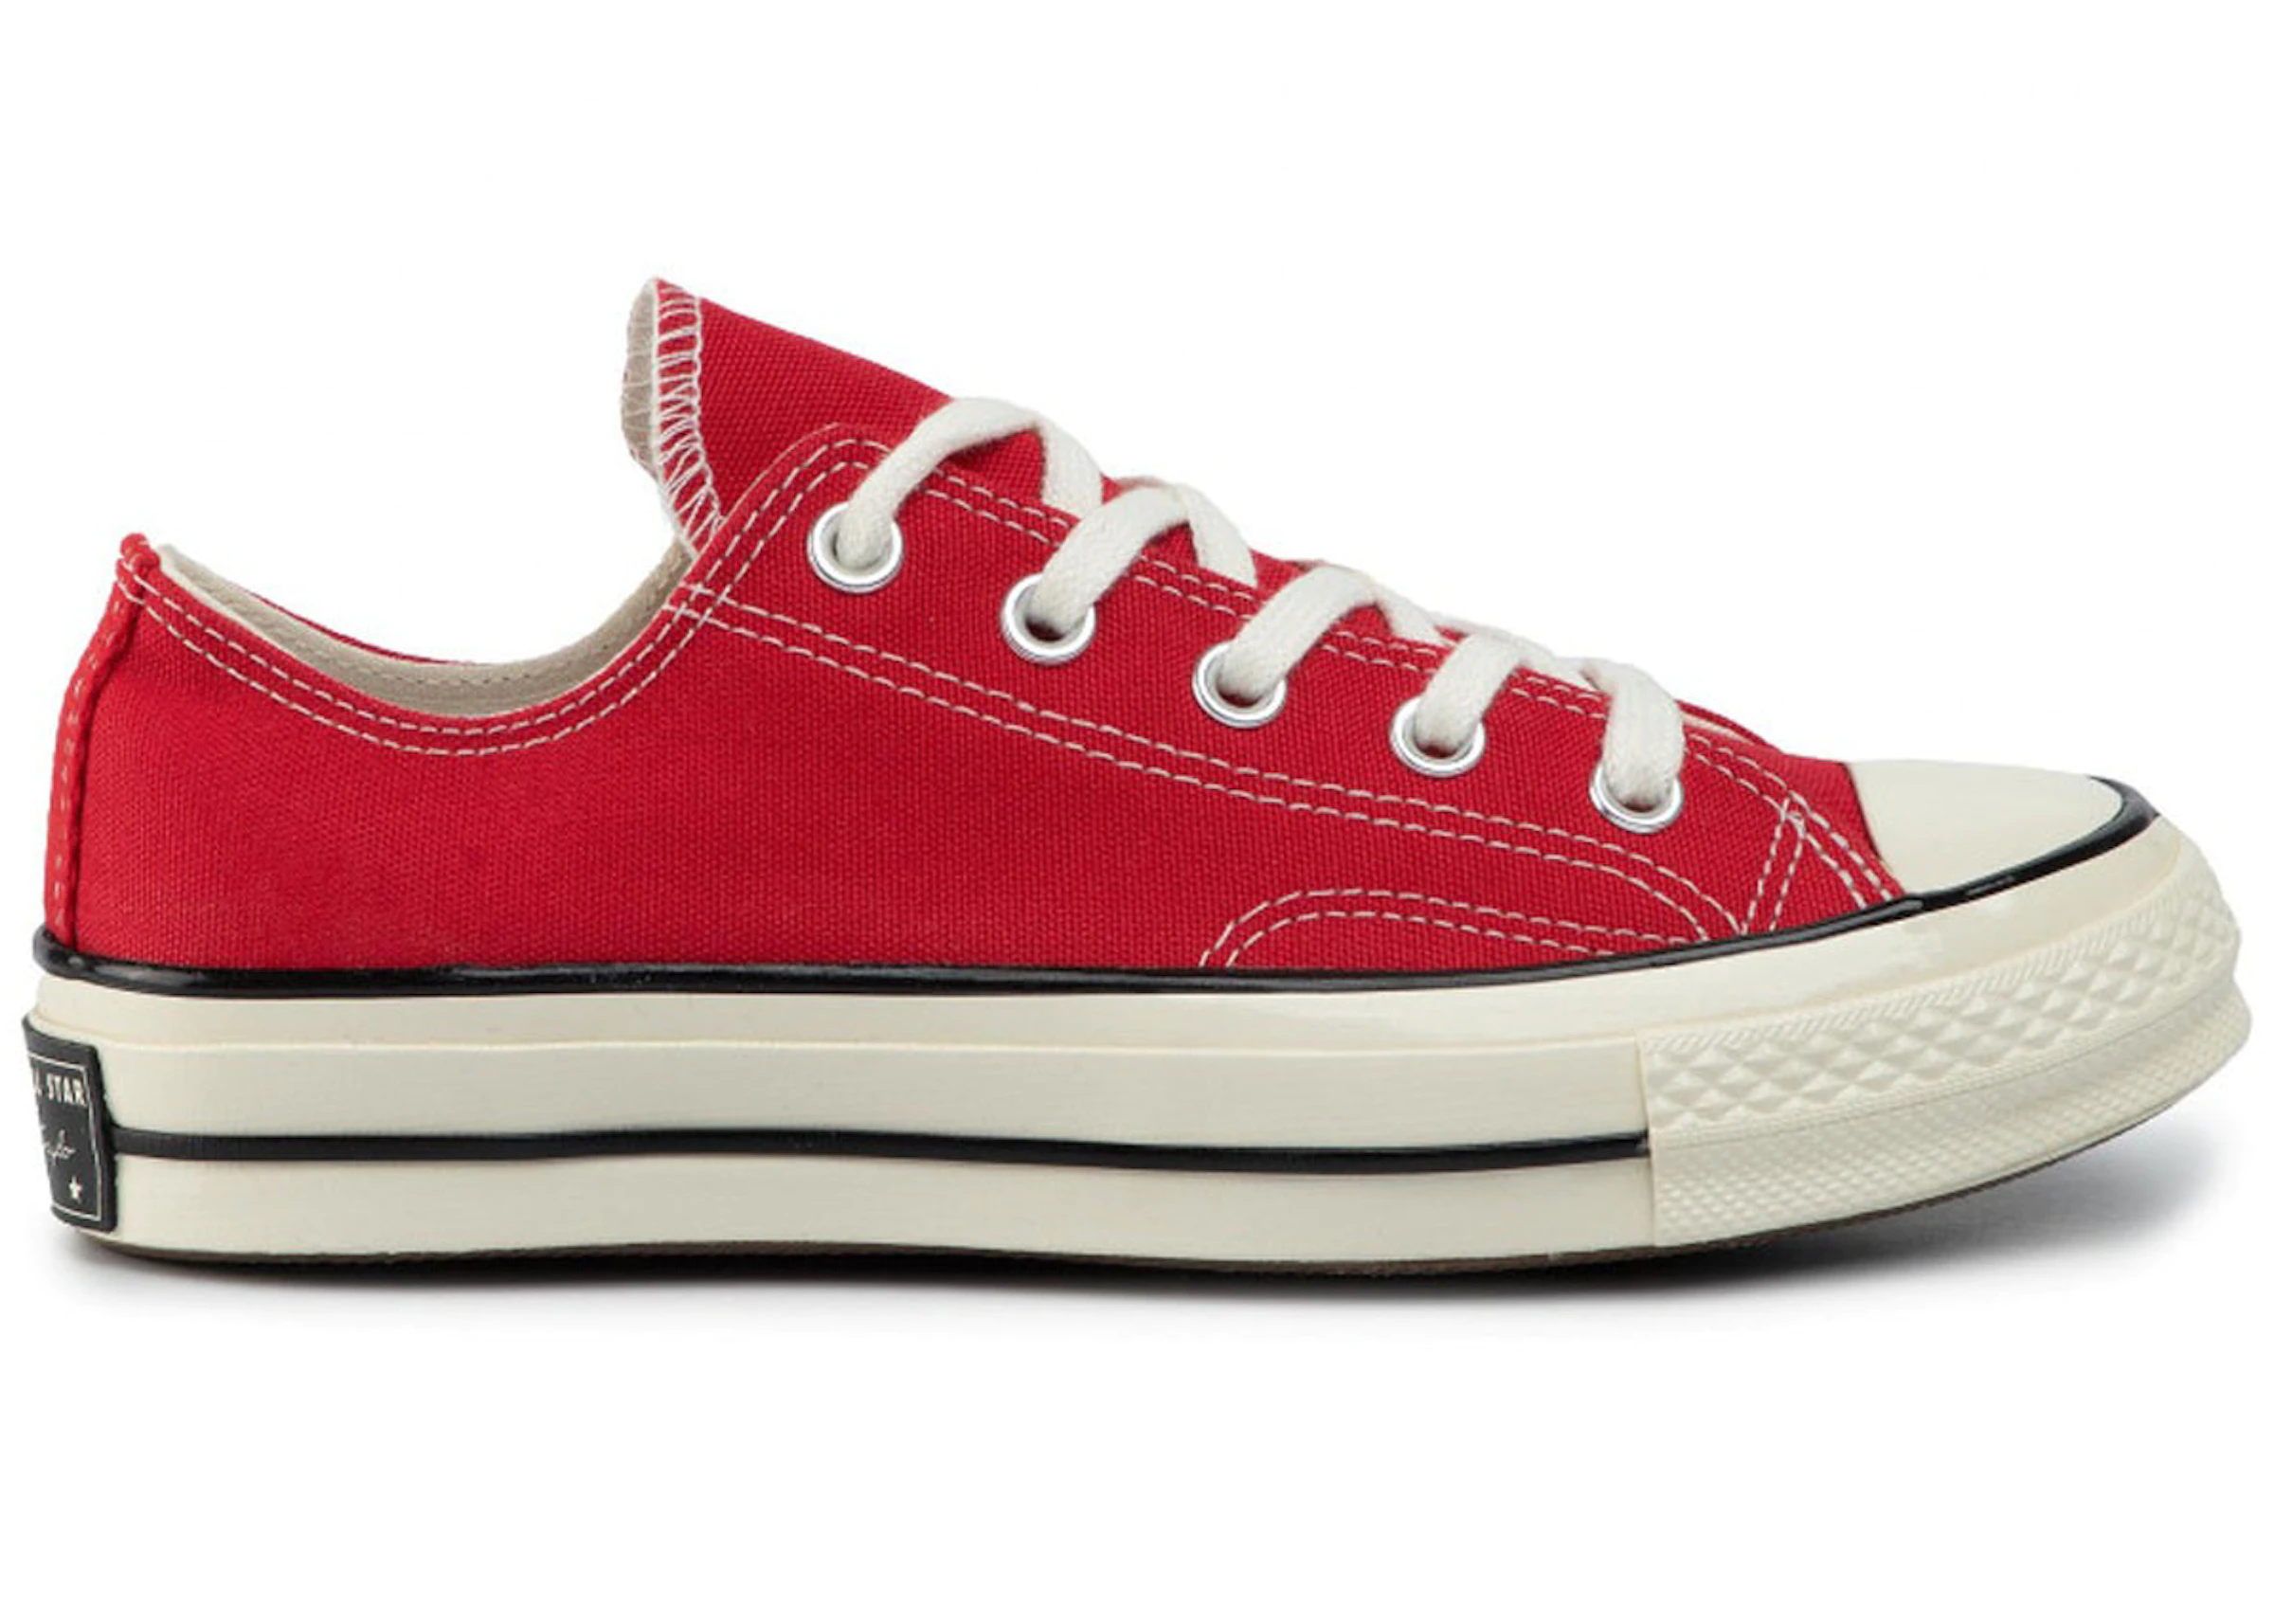 Converse Chuck Taylor All-Star 70 Ox Enamel Red - 164949C - US